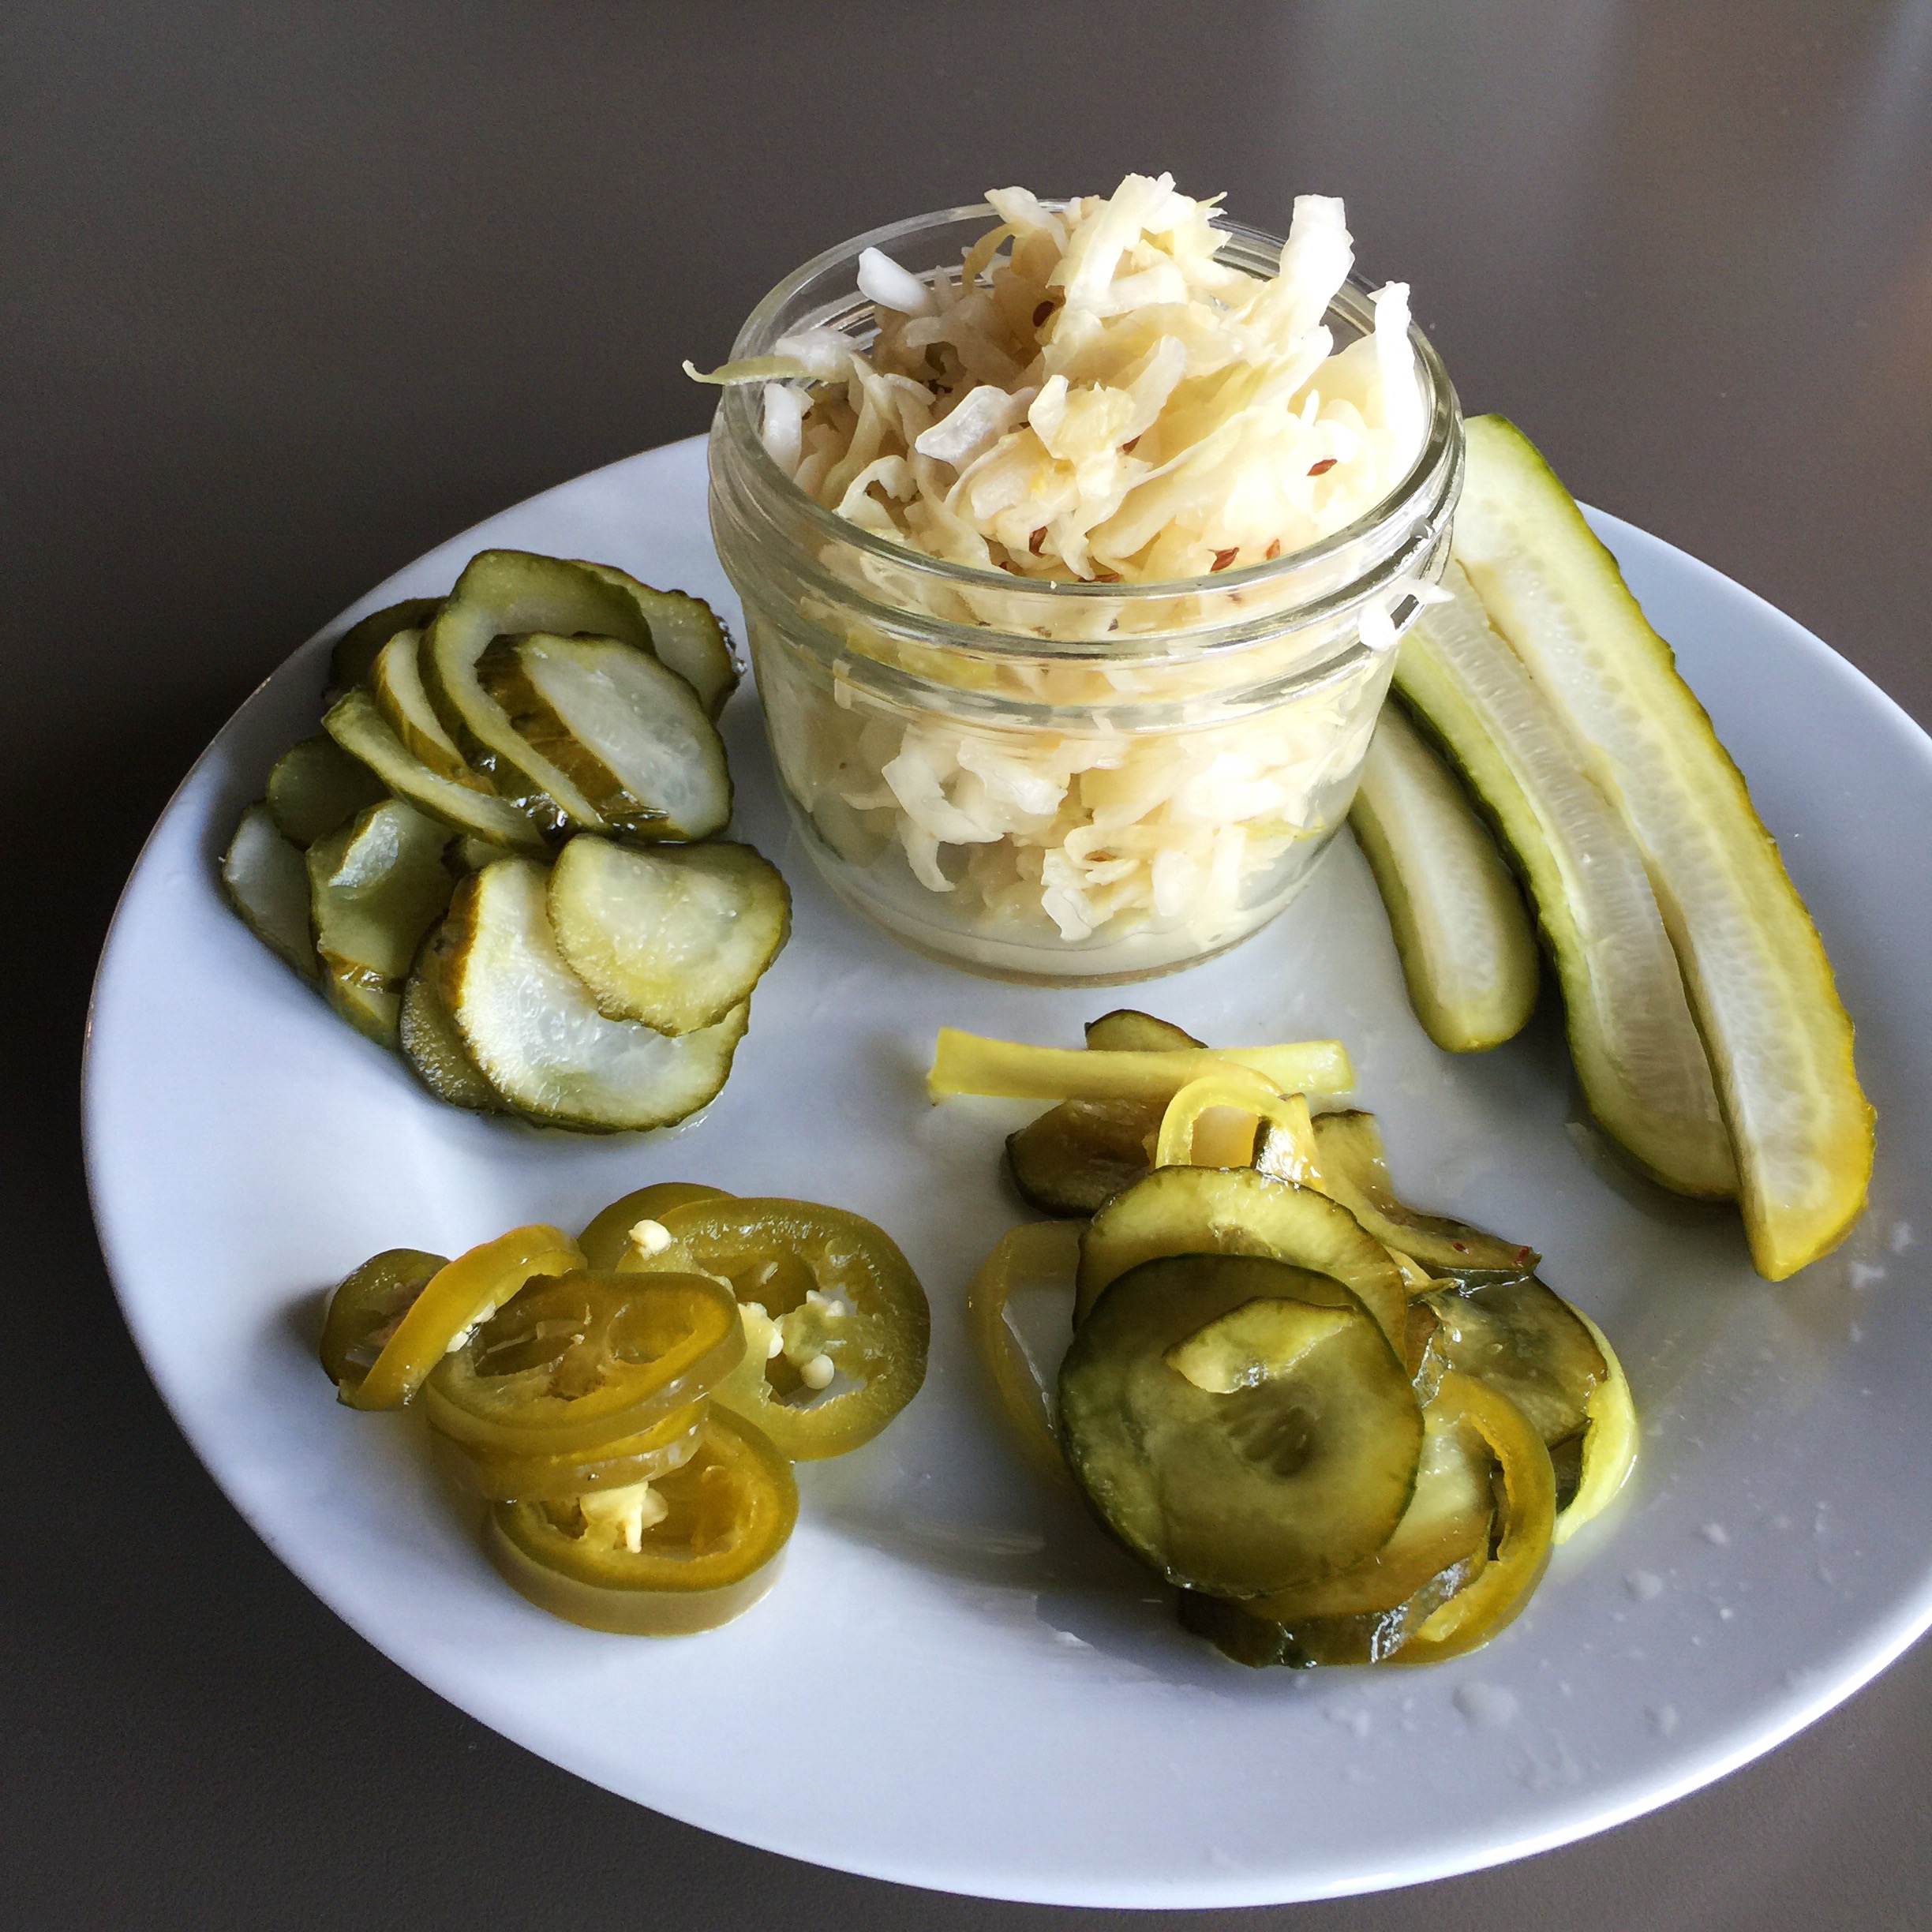 Dill pickle chips, sauerkraut, dill spears, bread & butter pickles, and pickled jalapeños at Stray Dogs (Credit: Stray Dogs)